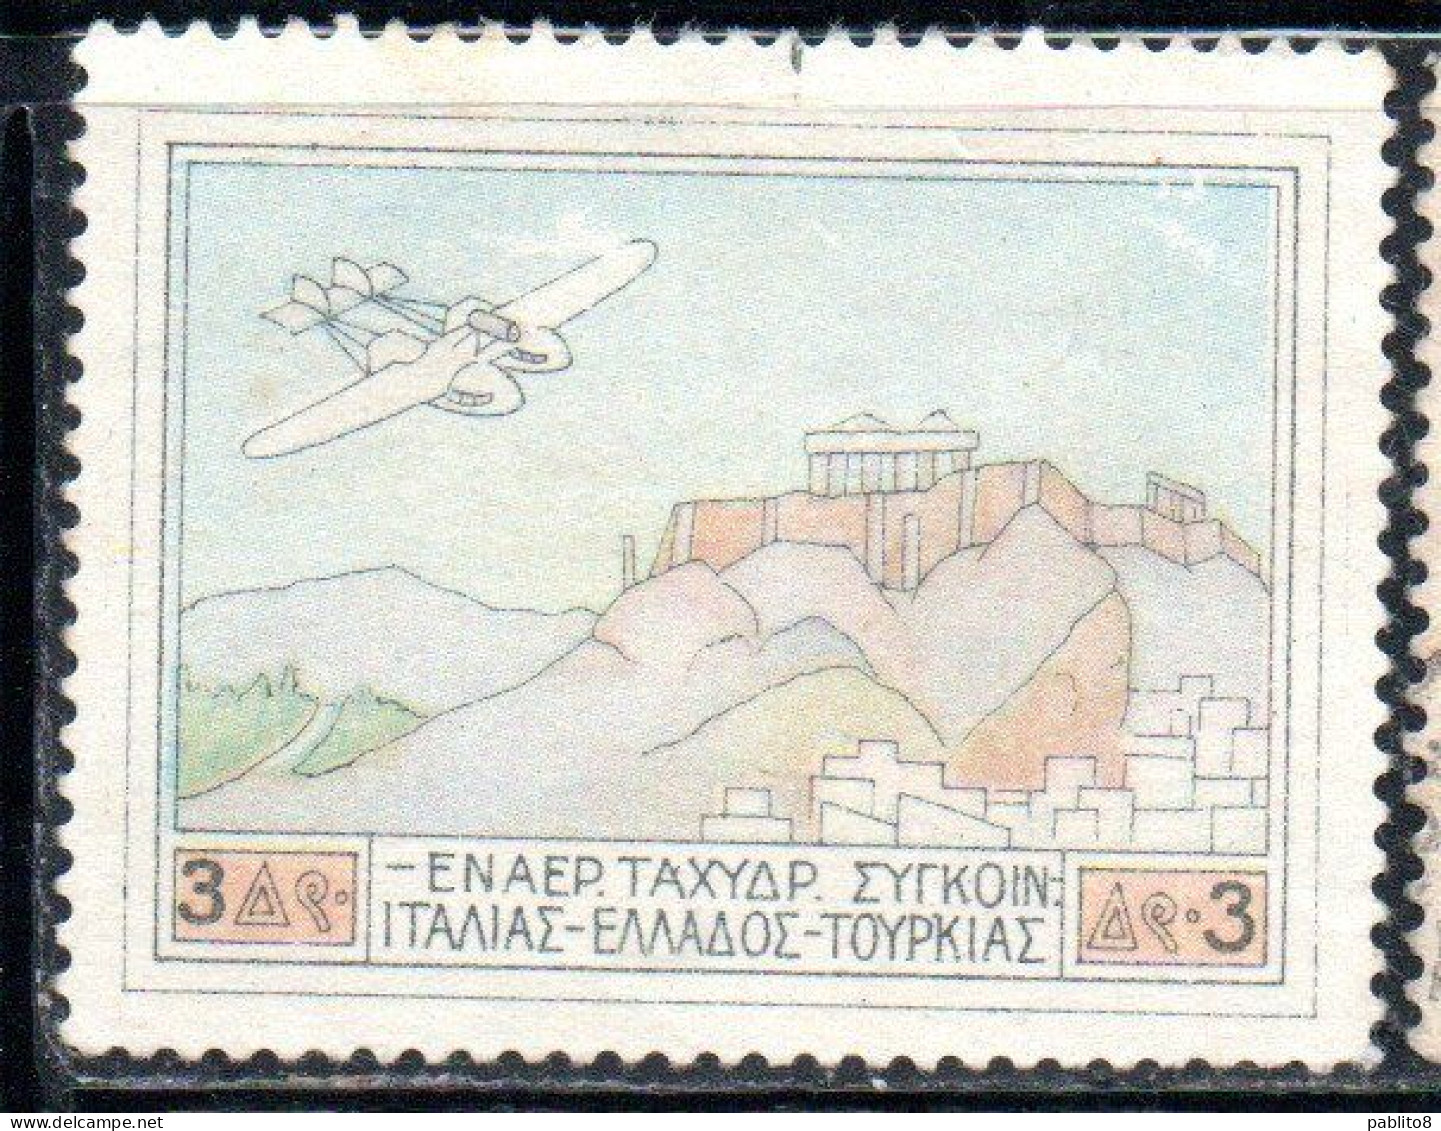 GREECE GRECIA ELLAS 1926 AIR POST MAIL AIRMAIL ITALY-TURKEY-RHODES SERVICE FLYING BOAT OVER ACROPOLIS 3d USED USATO - Oblitérés